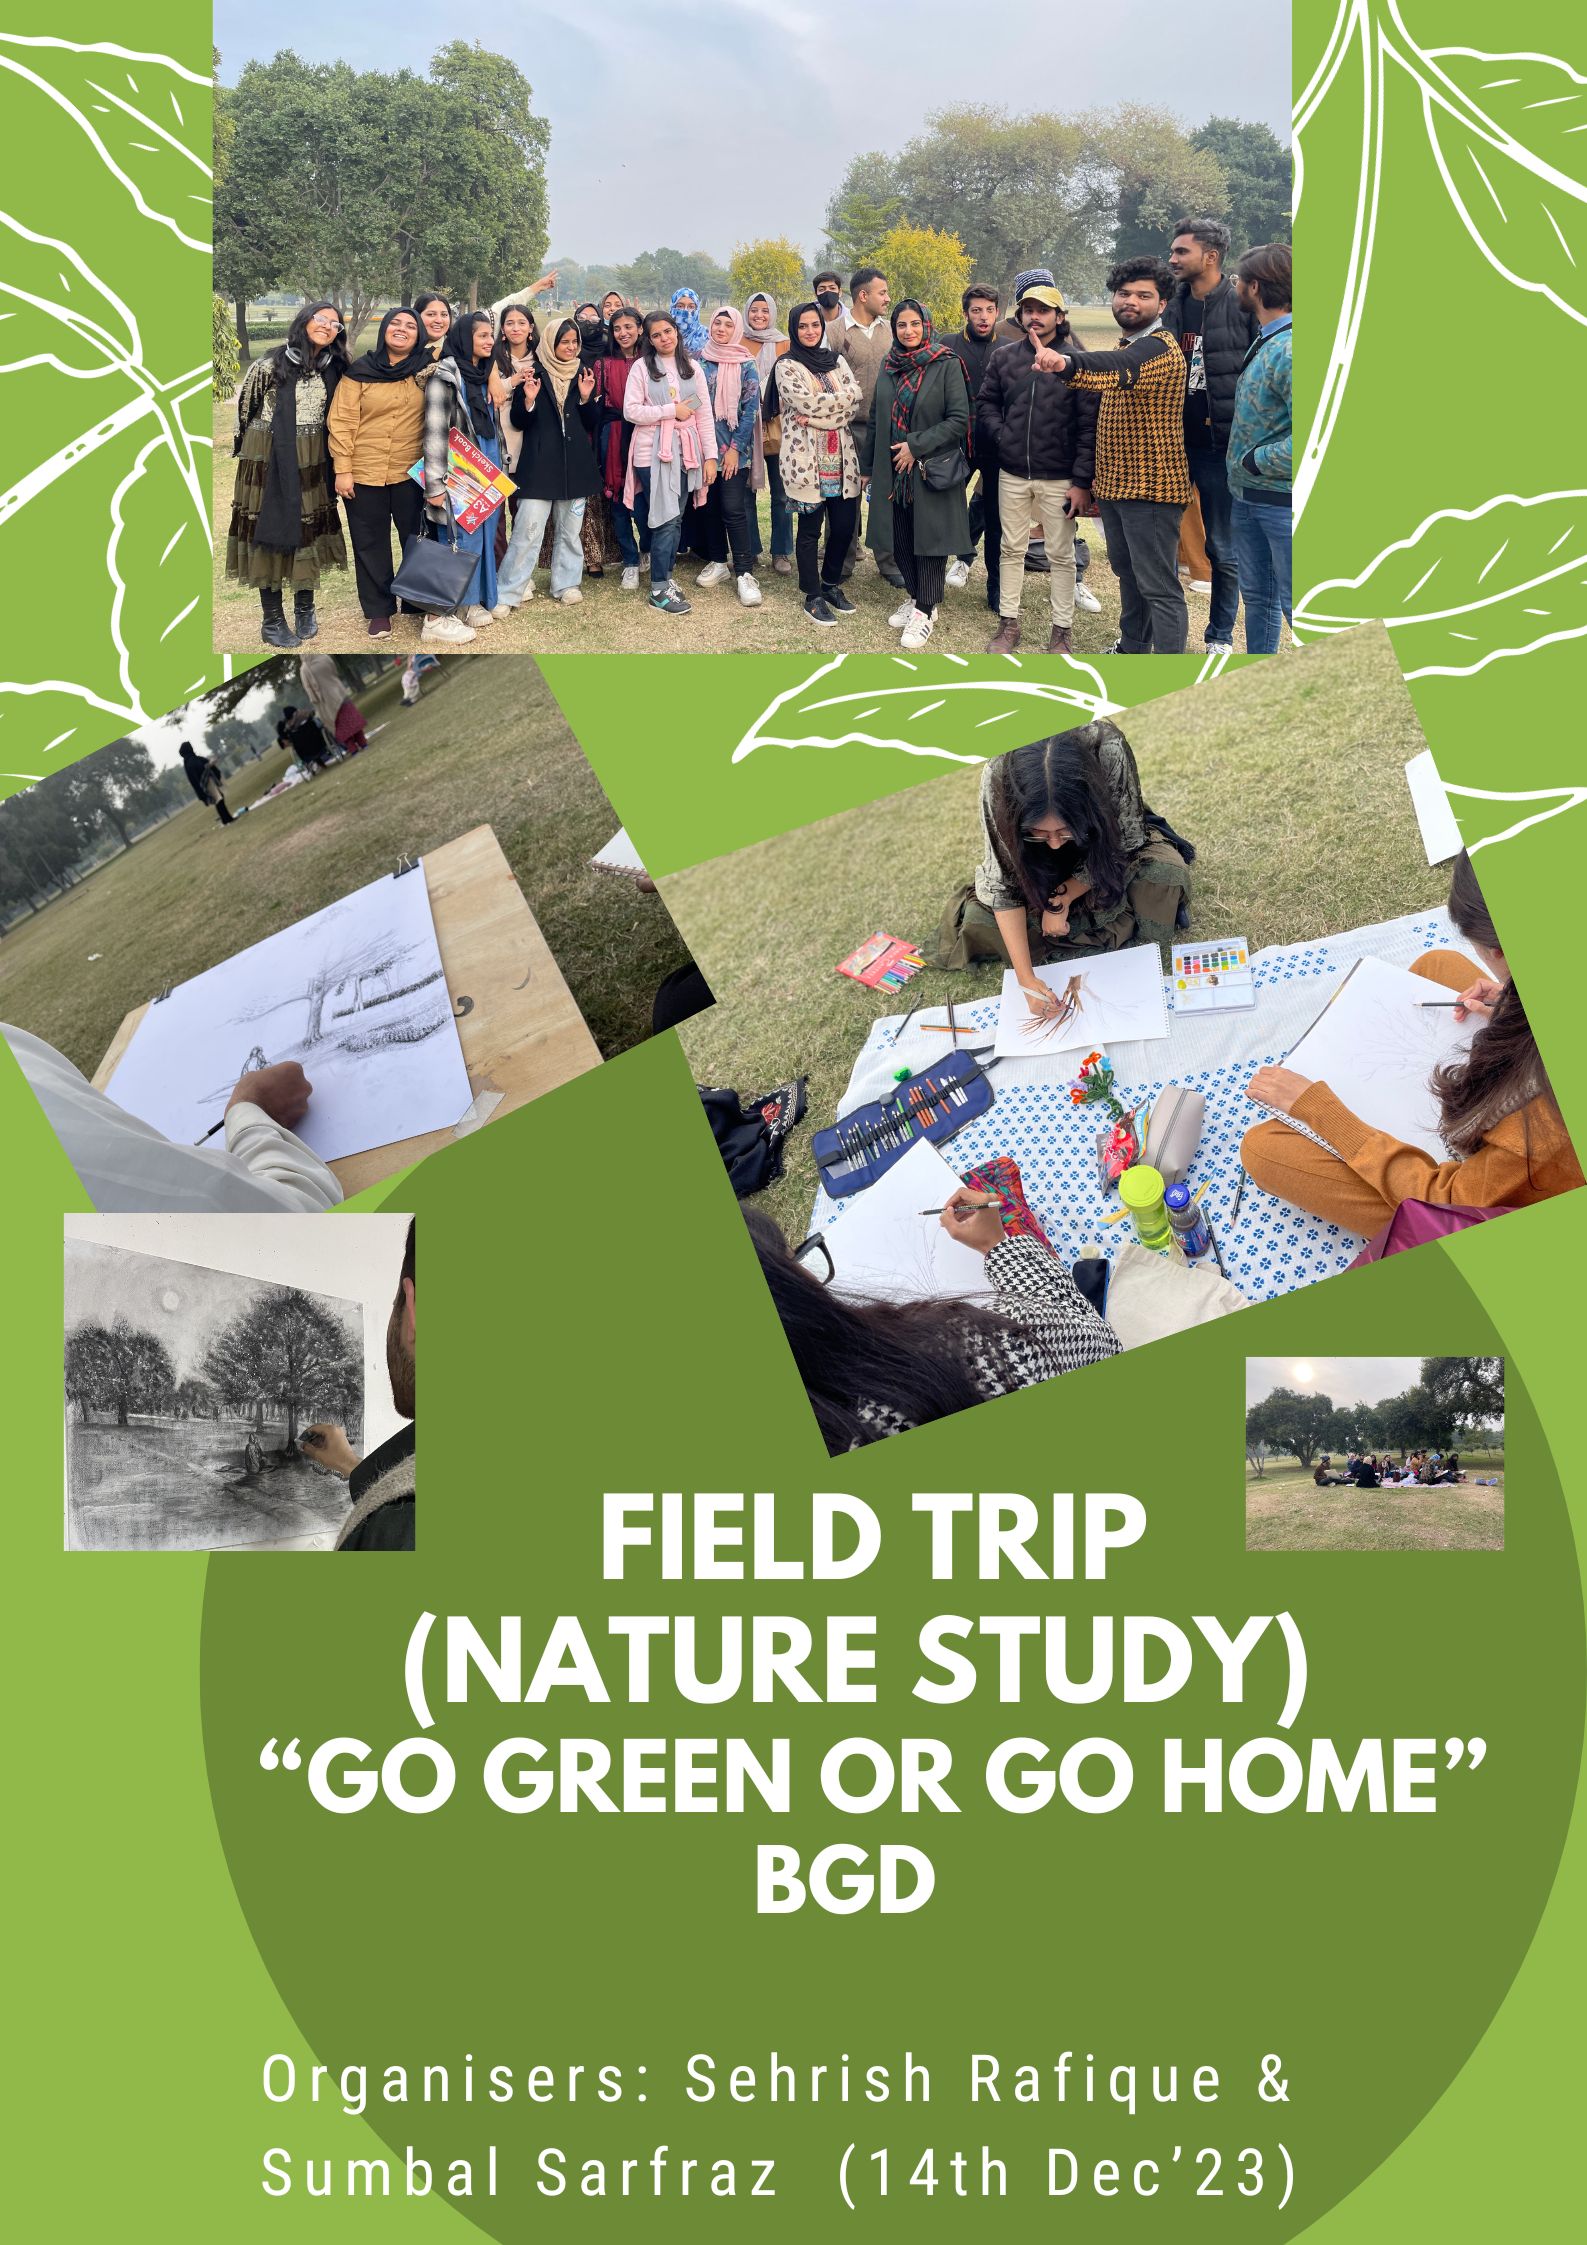 FIELD TRIP to a park to study Nature "GO GREEN OR GO HOME" Organizing Members: Sehrish Rafique and Sumbal Sarfraz